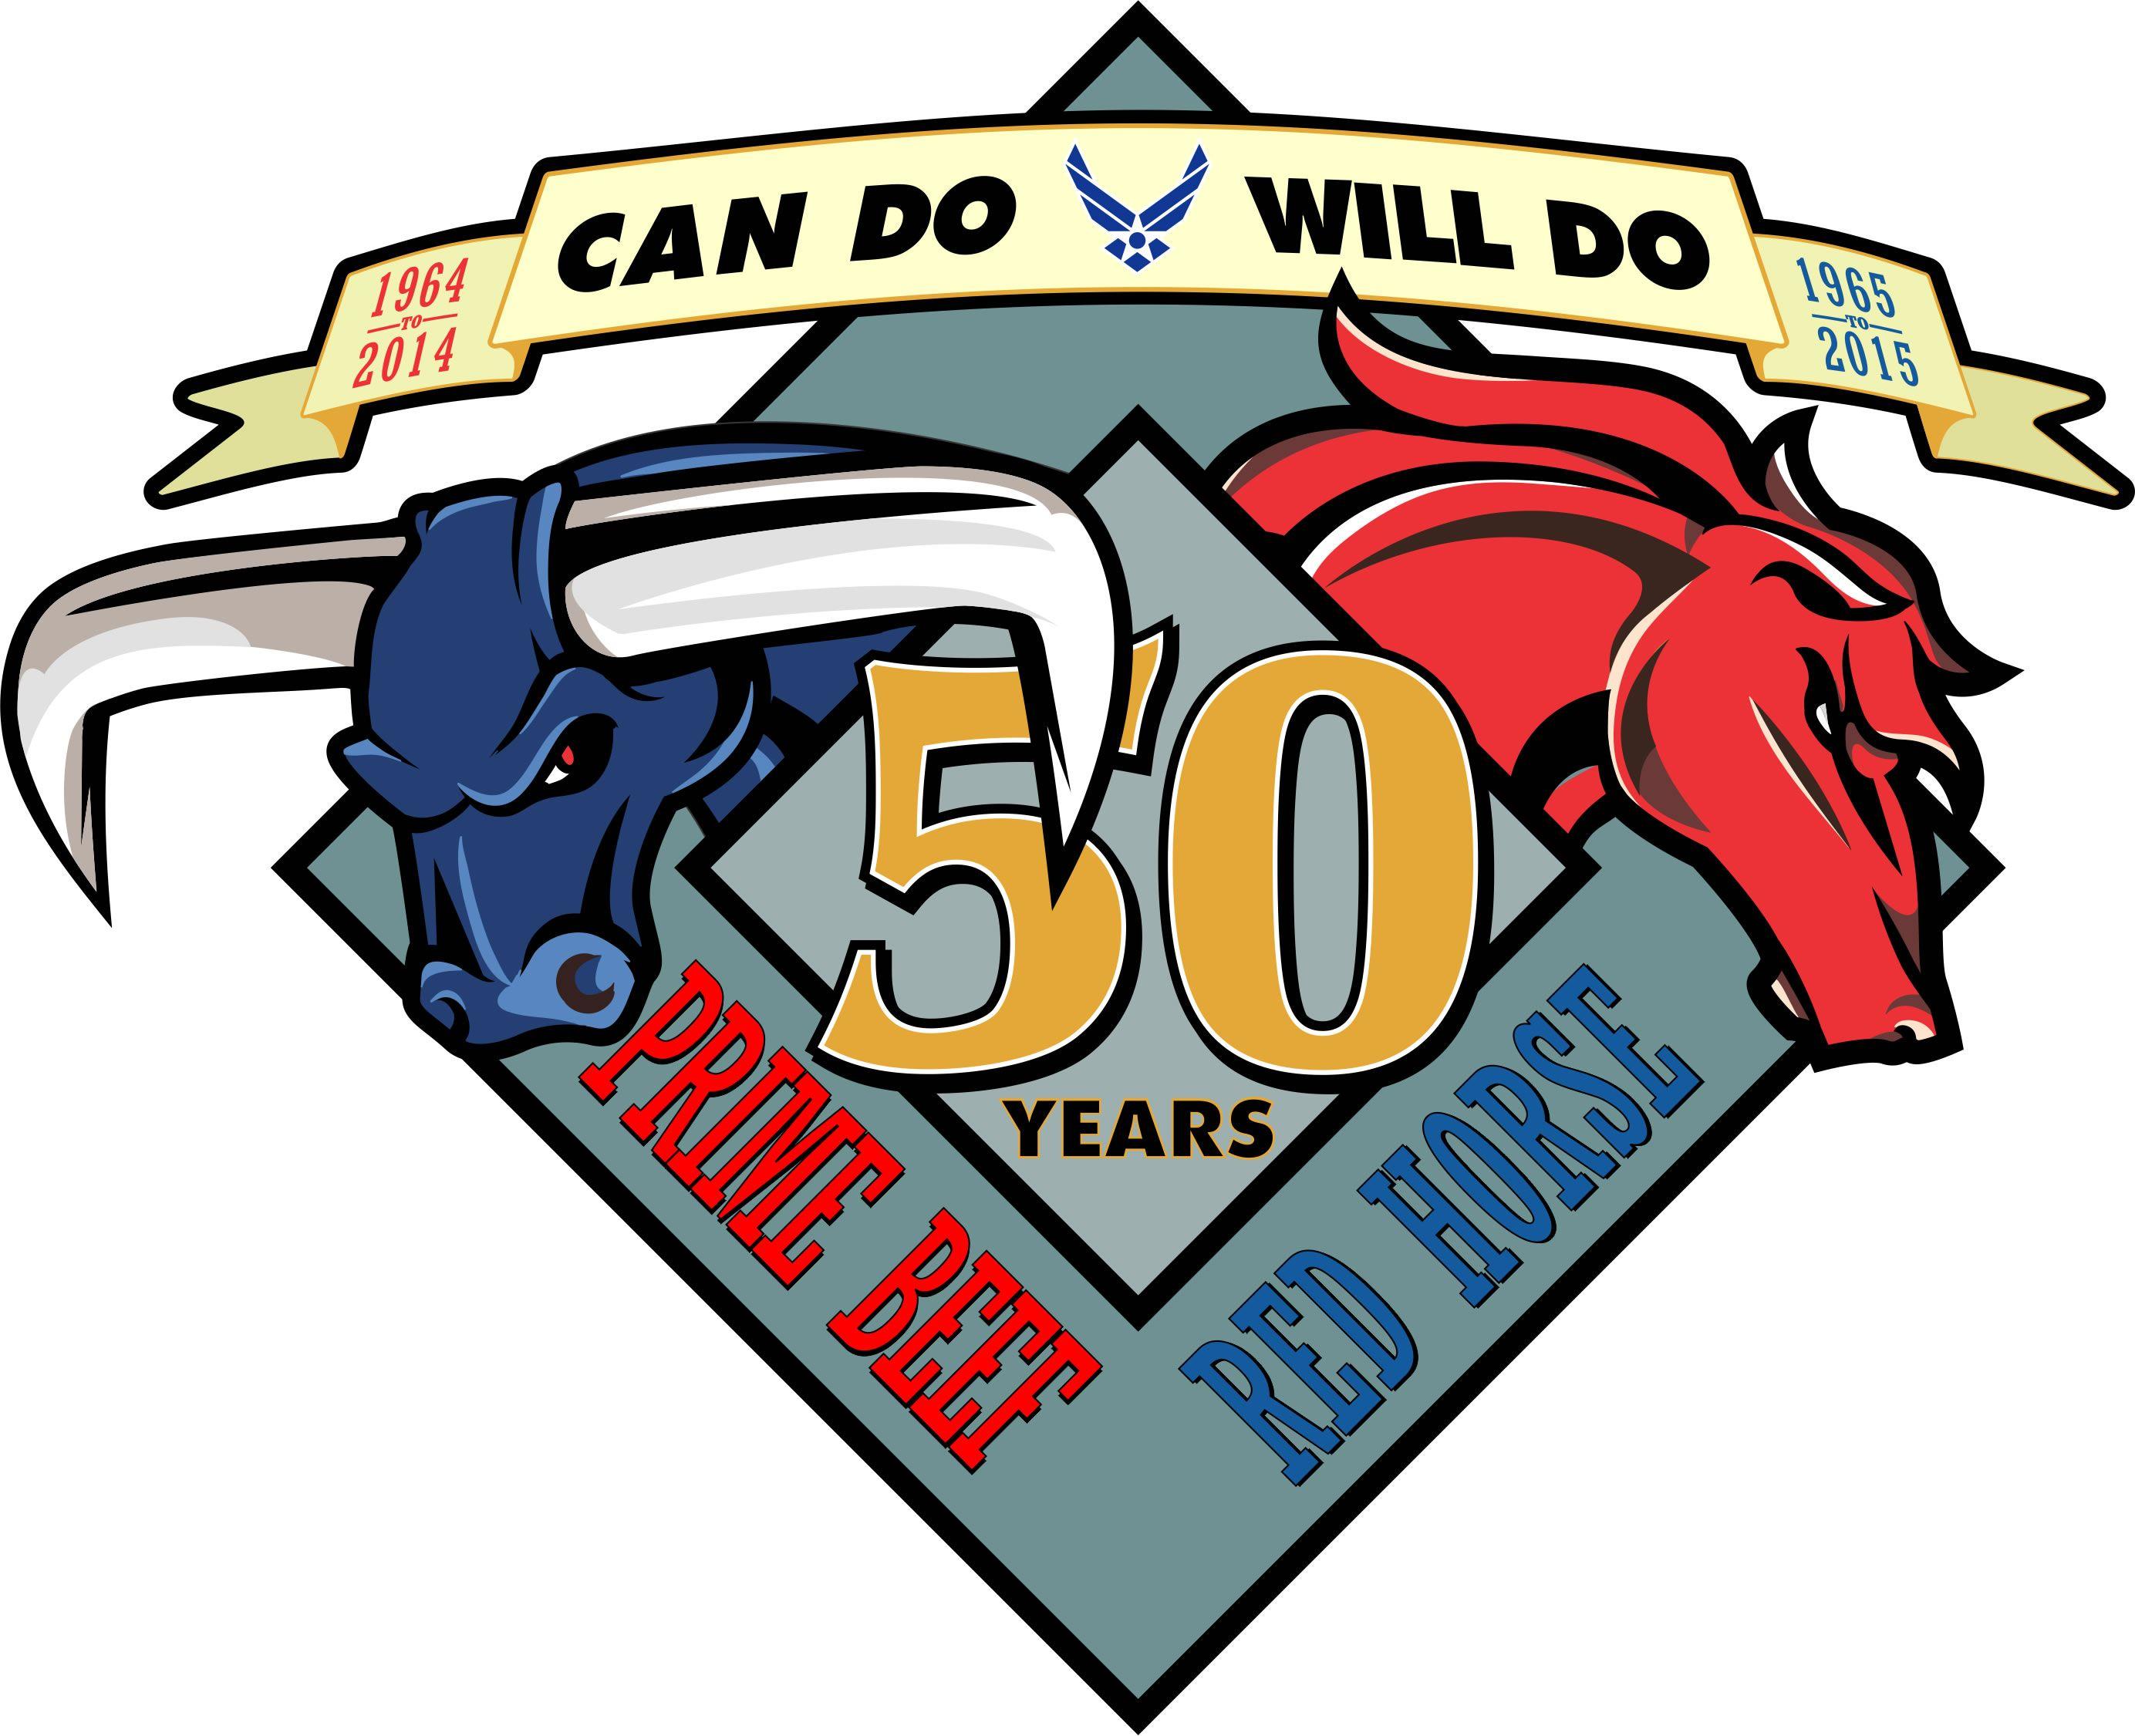 USAF Red Horse Logo - 50 Years of Can Do Will Do